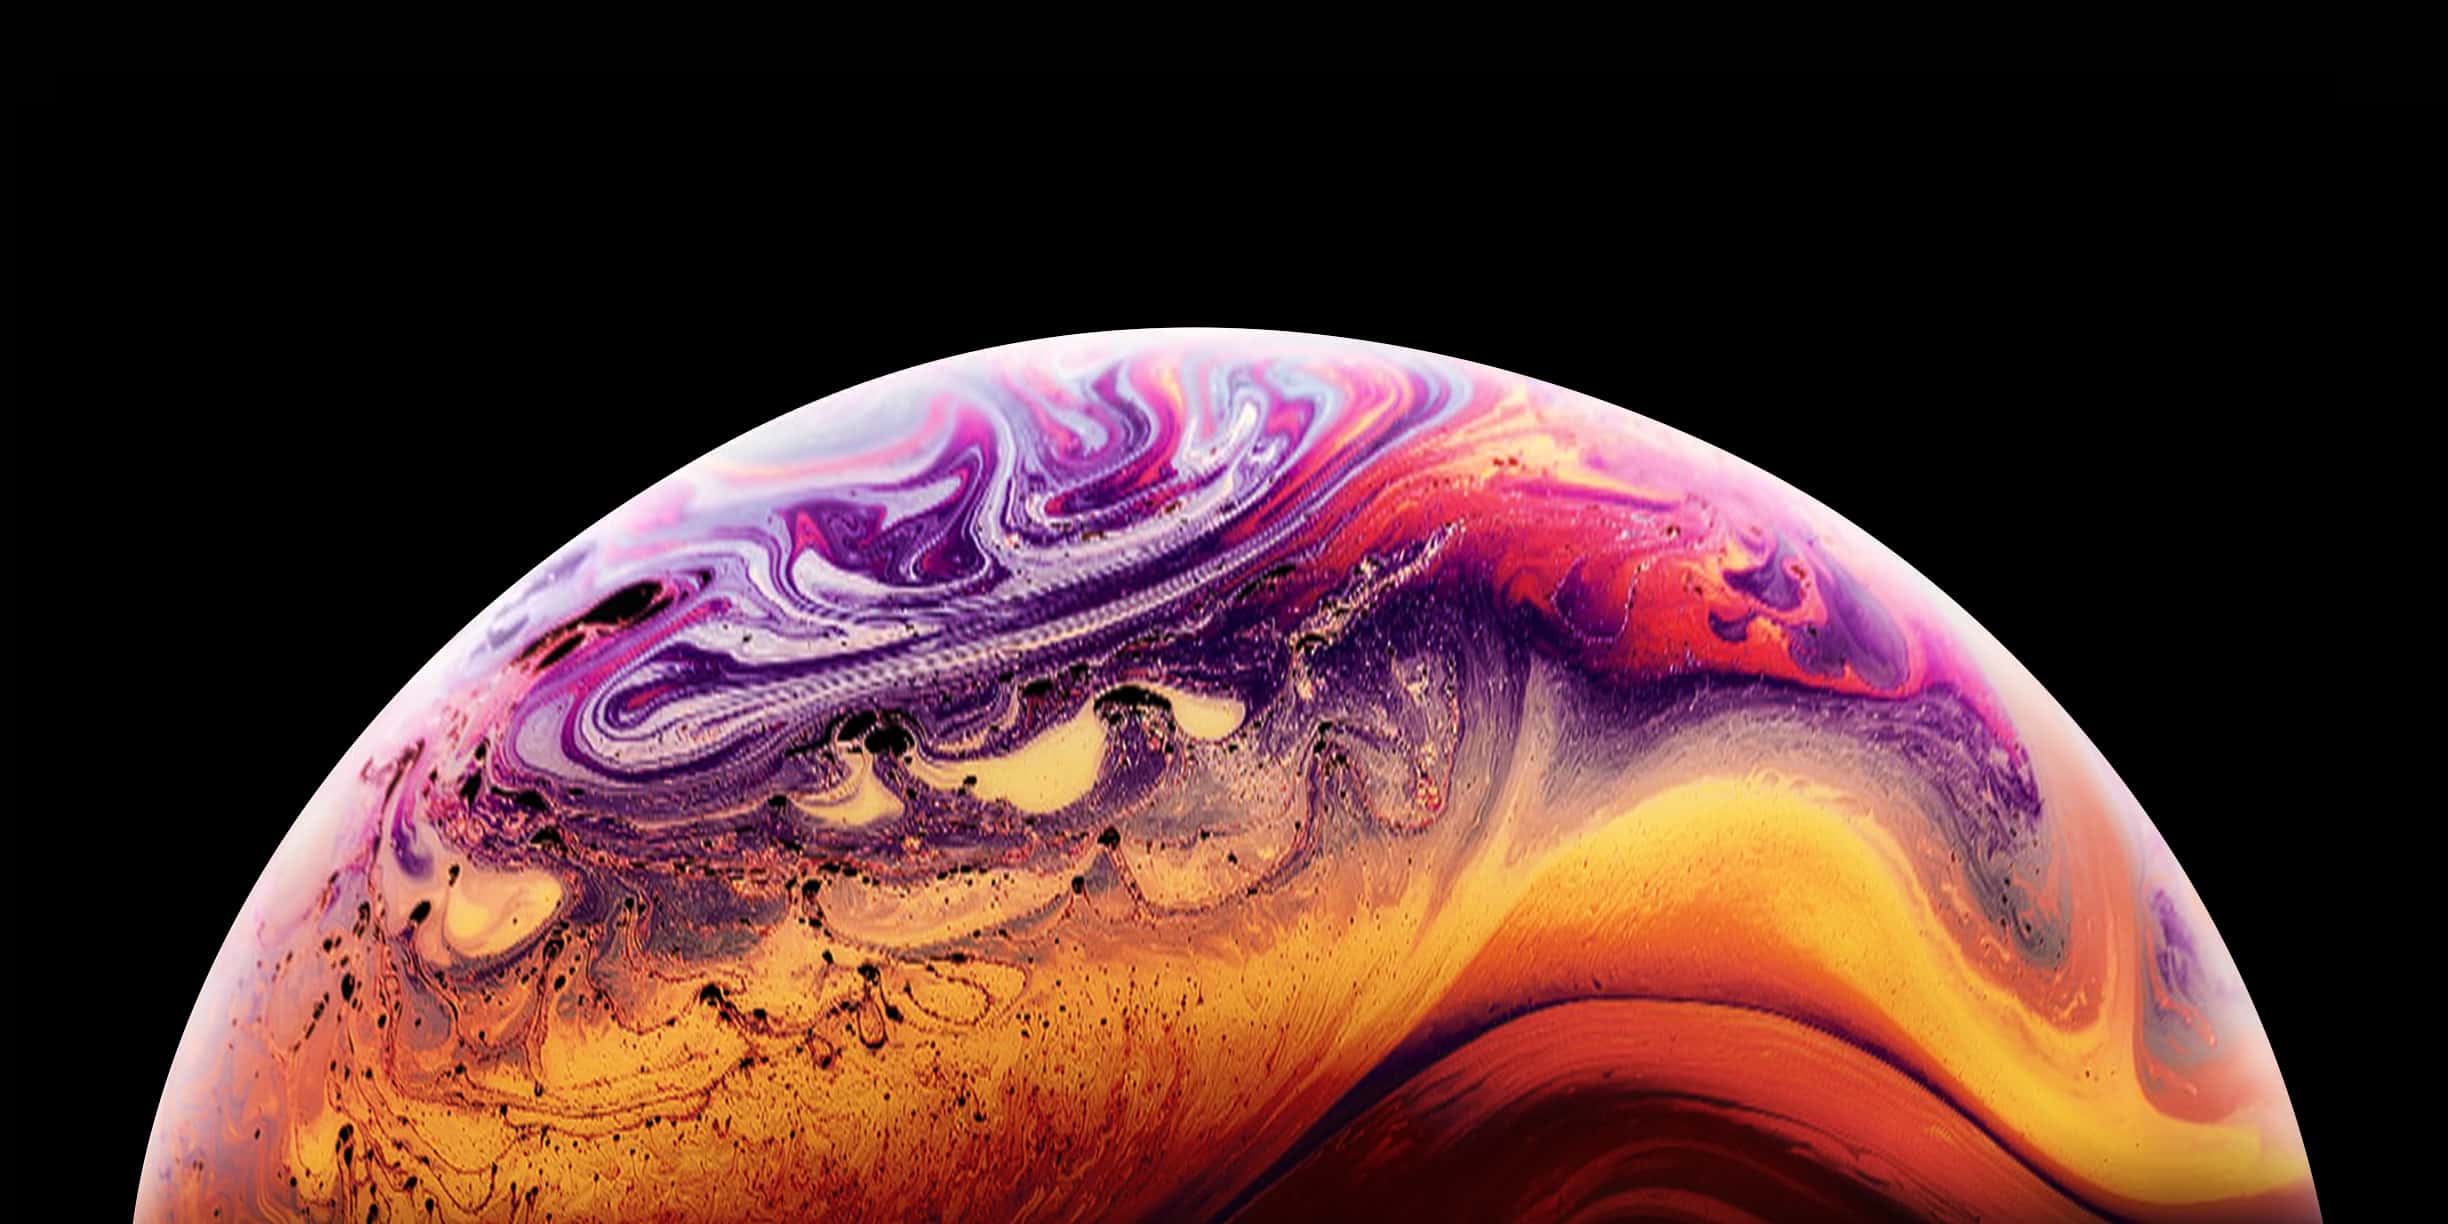 Grab the new iPhone XS wallpaper right here. Cult of Mac